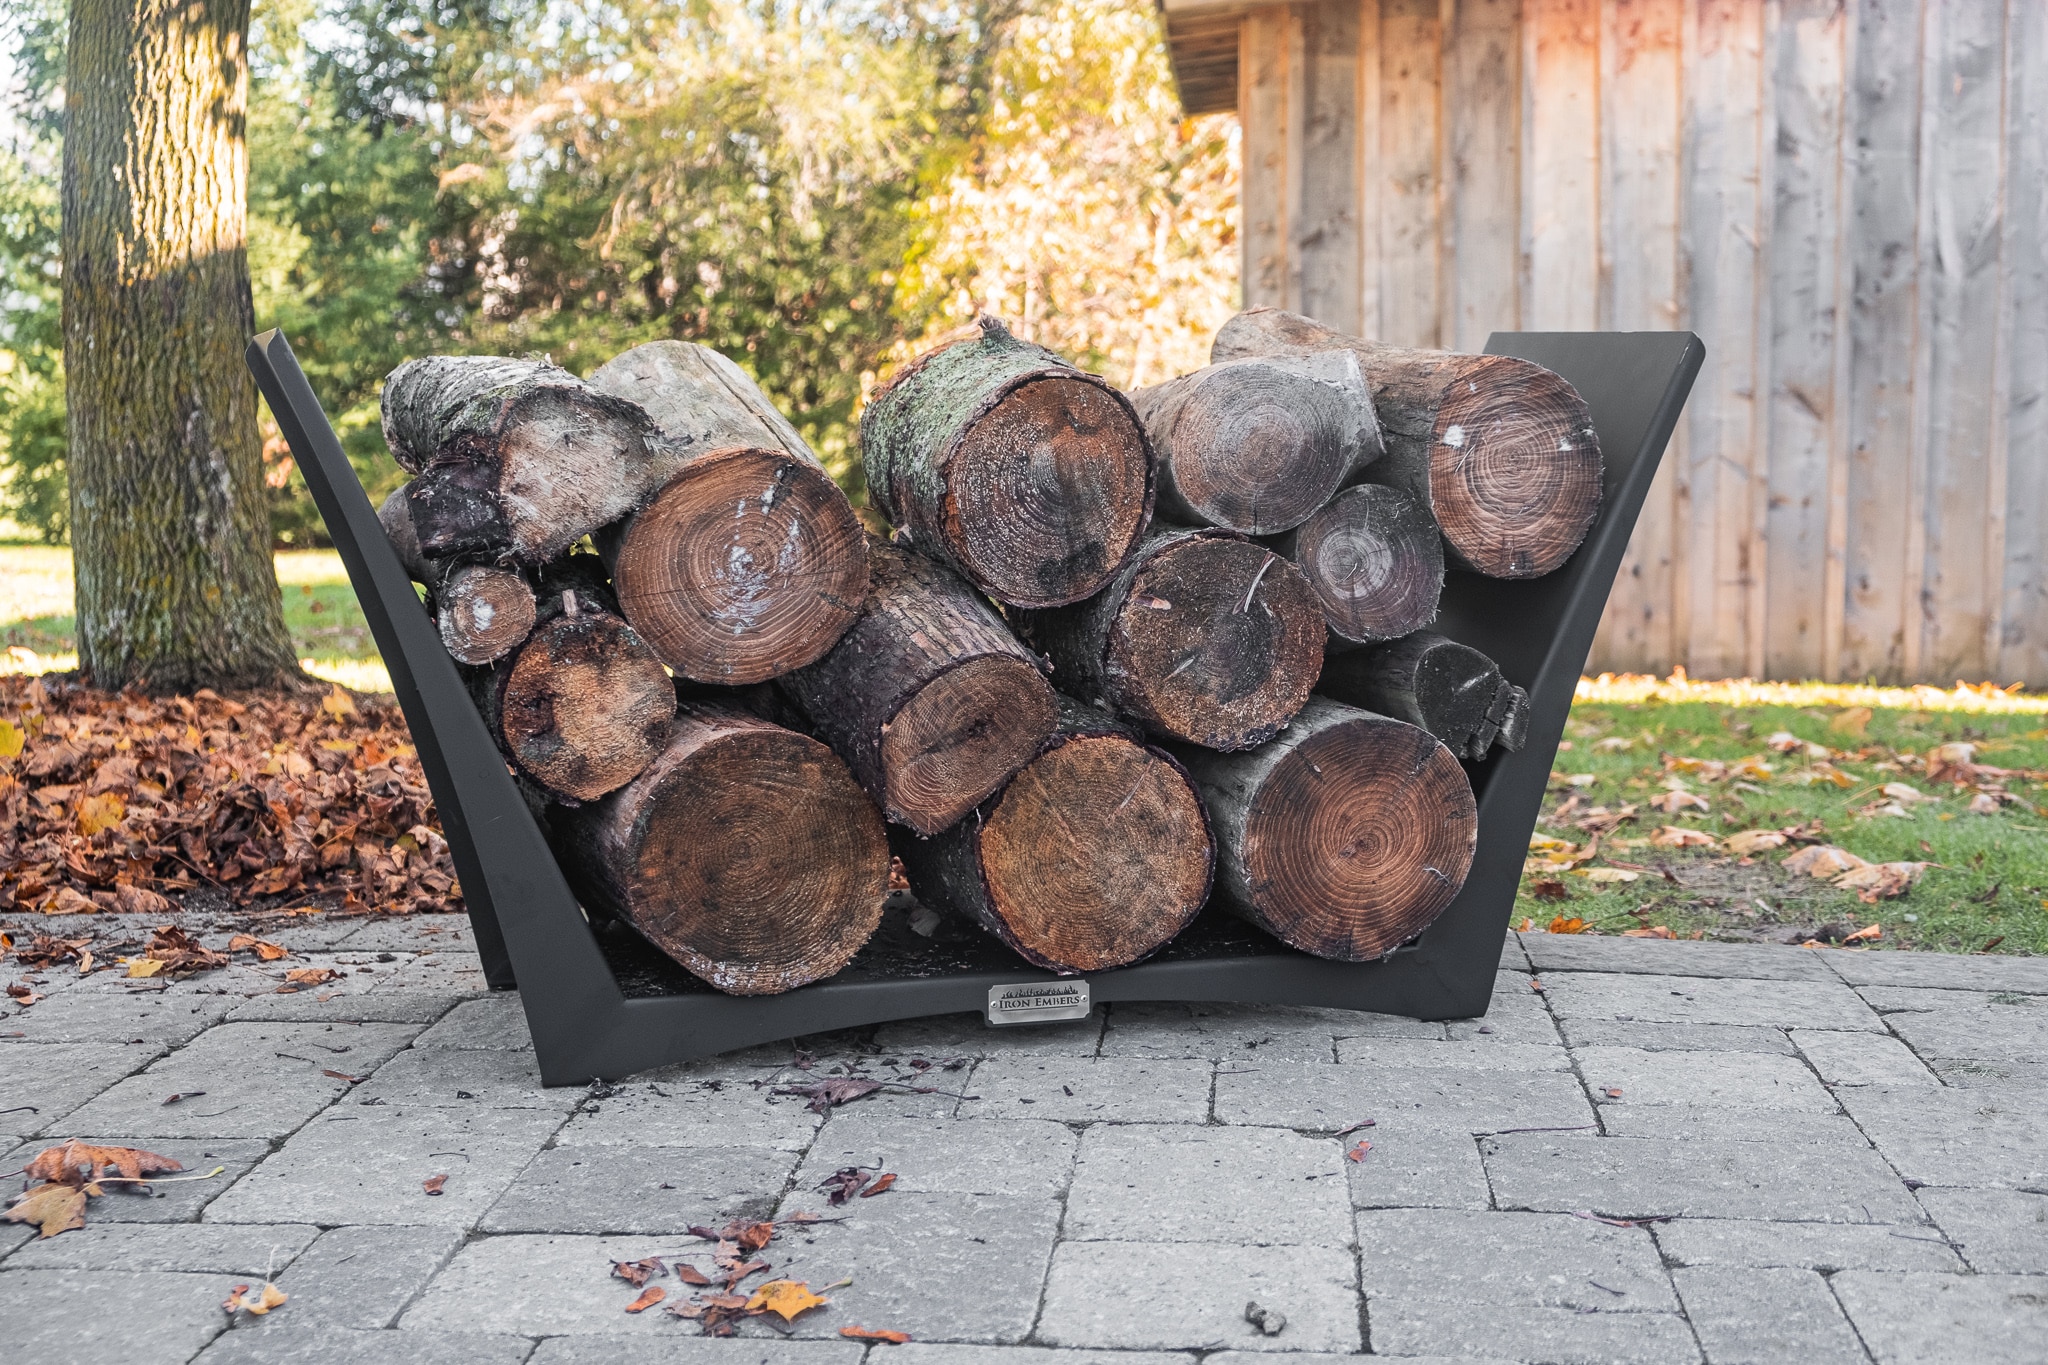 Log rack full of fire wood on a patio